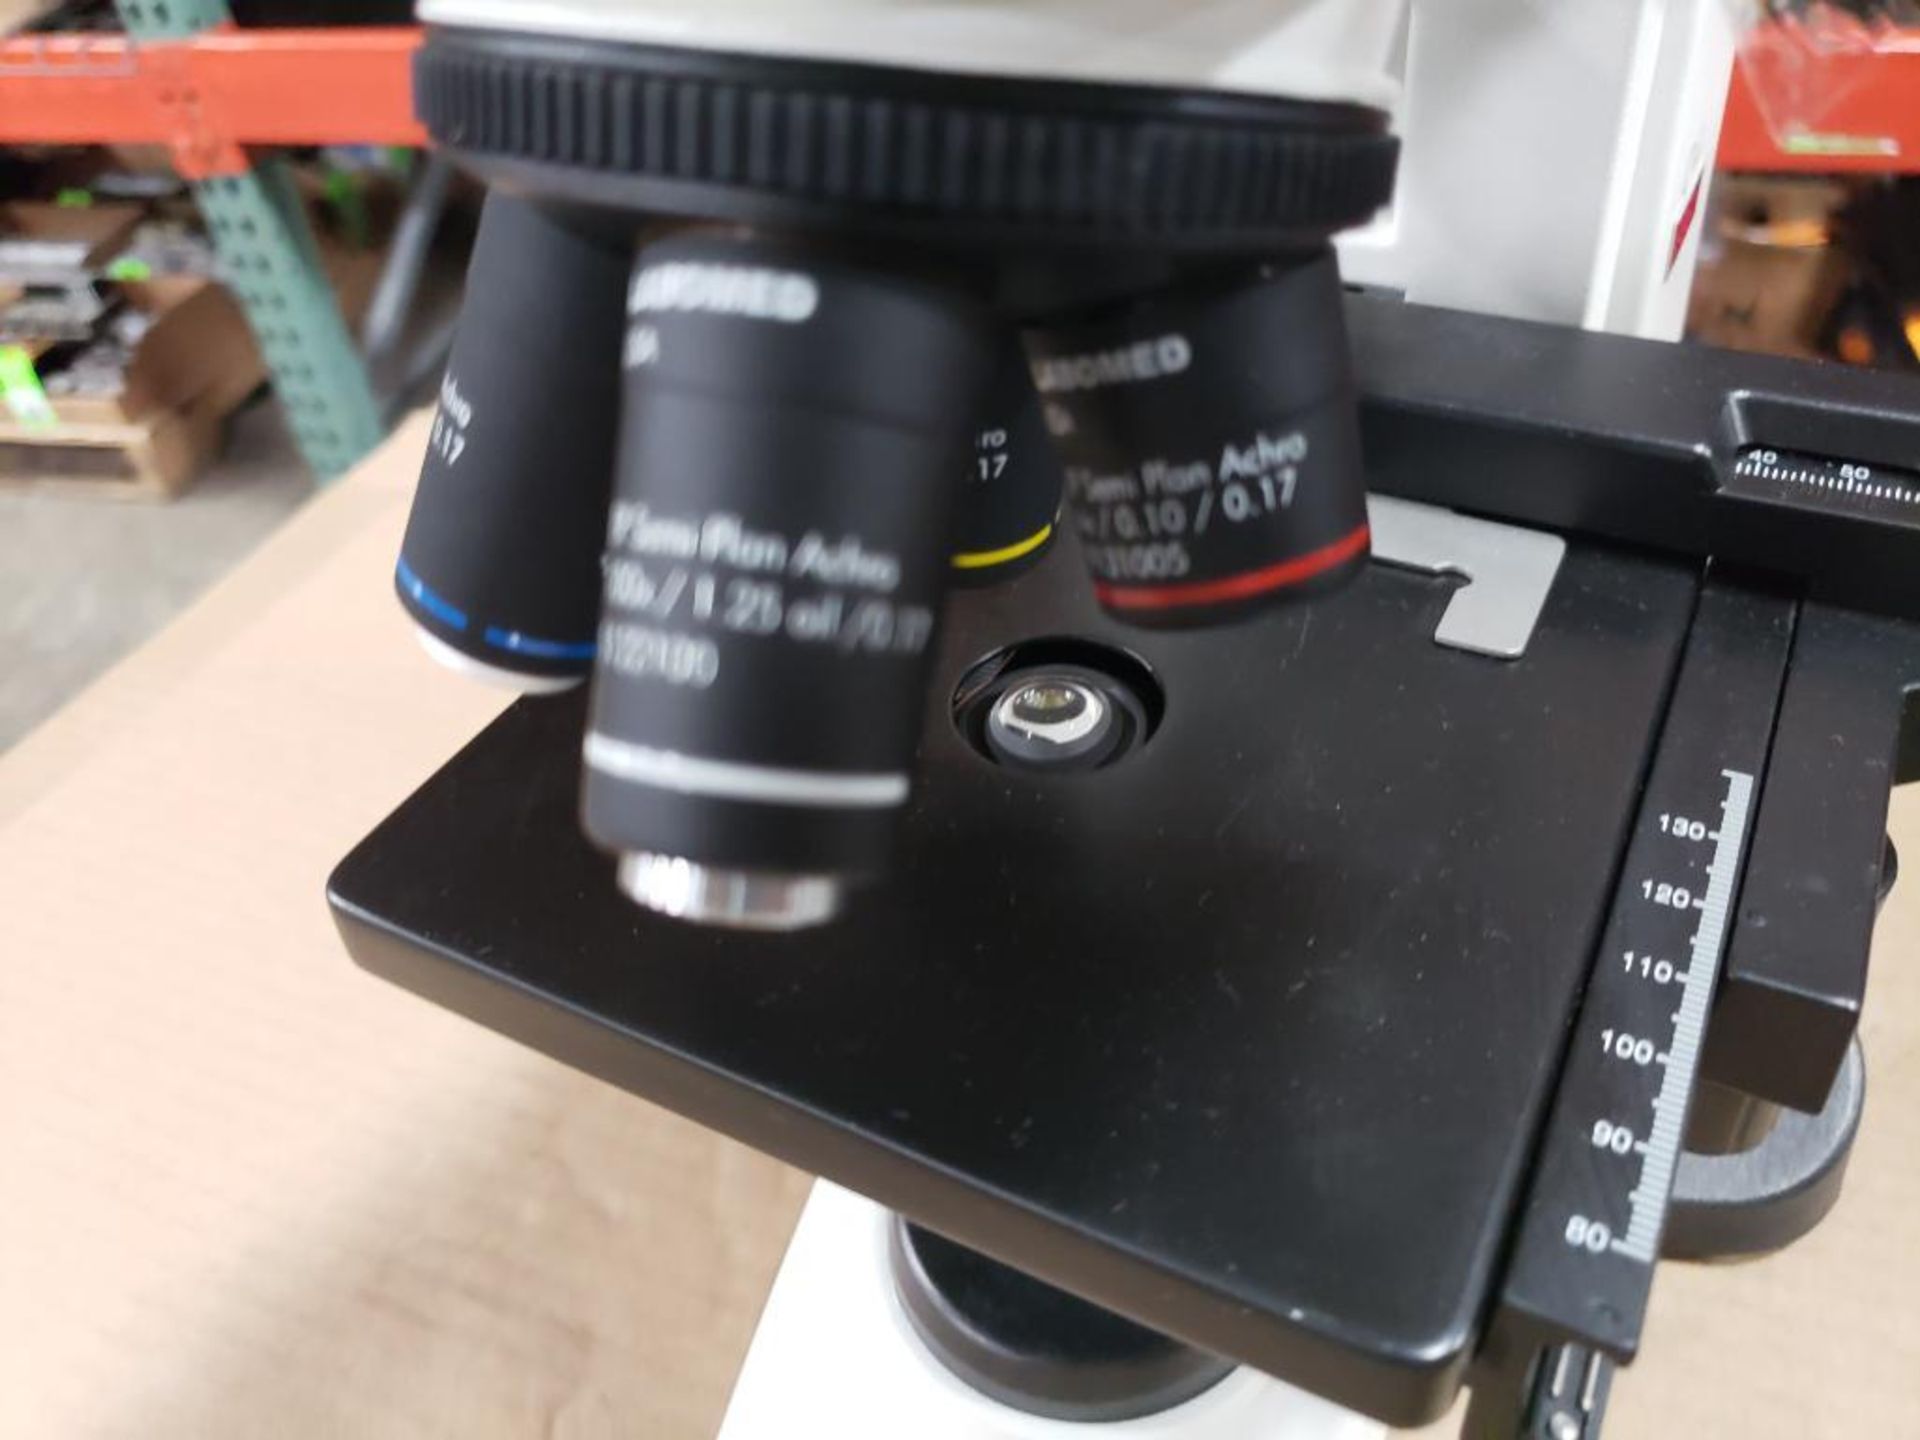 Labomed CxL 9961 microscope. - Image 4 of 8